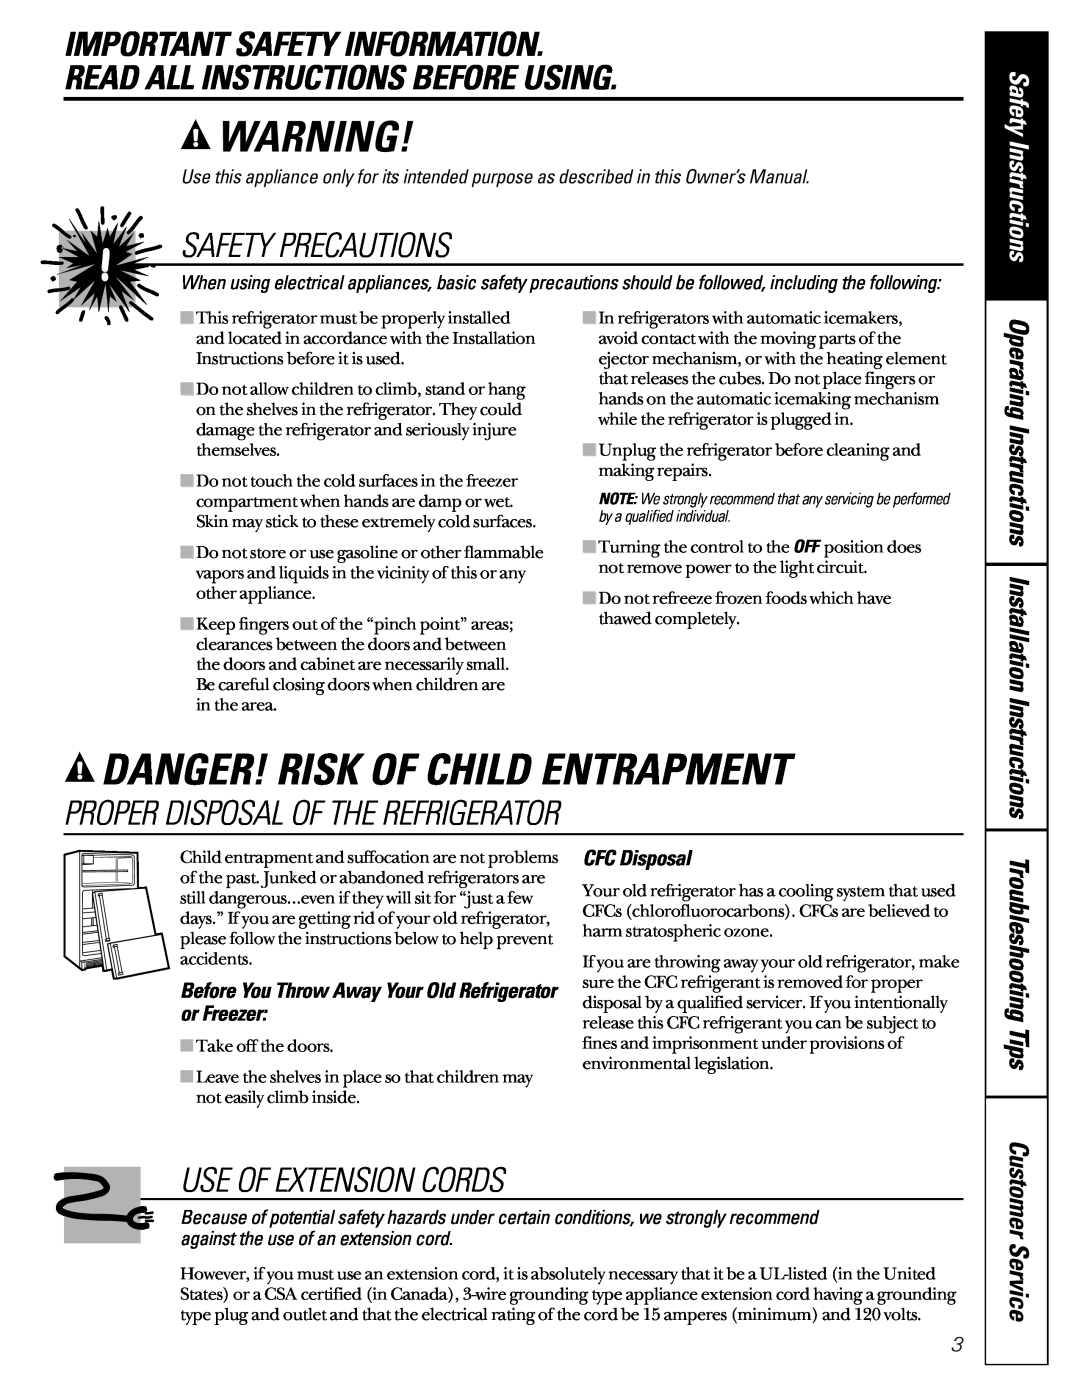 GE TCX22 Danger! Risk Of Child Entrapment, Important Safety Information Read All Instructions Before Using, CFC Disposal 